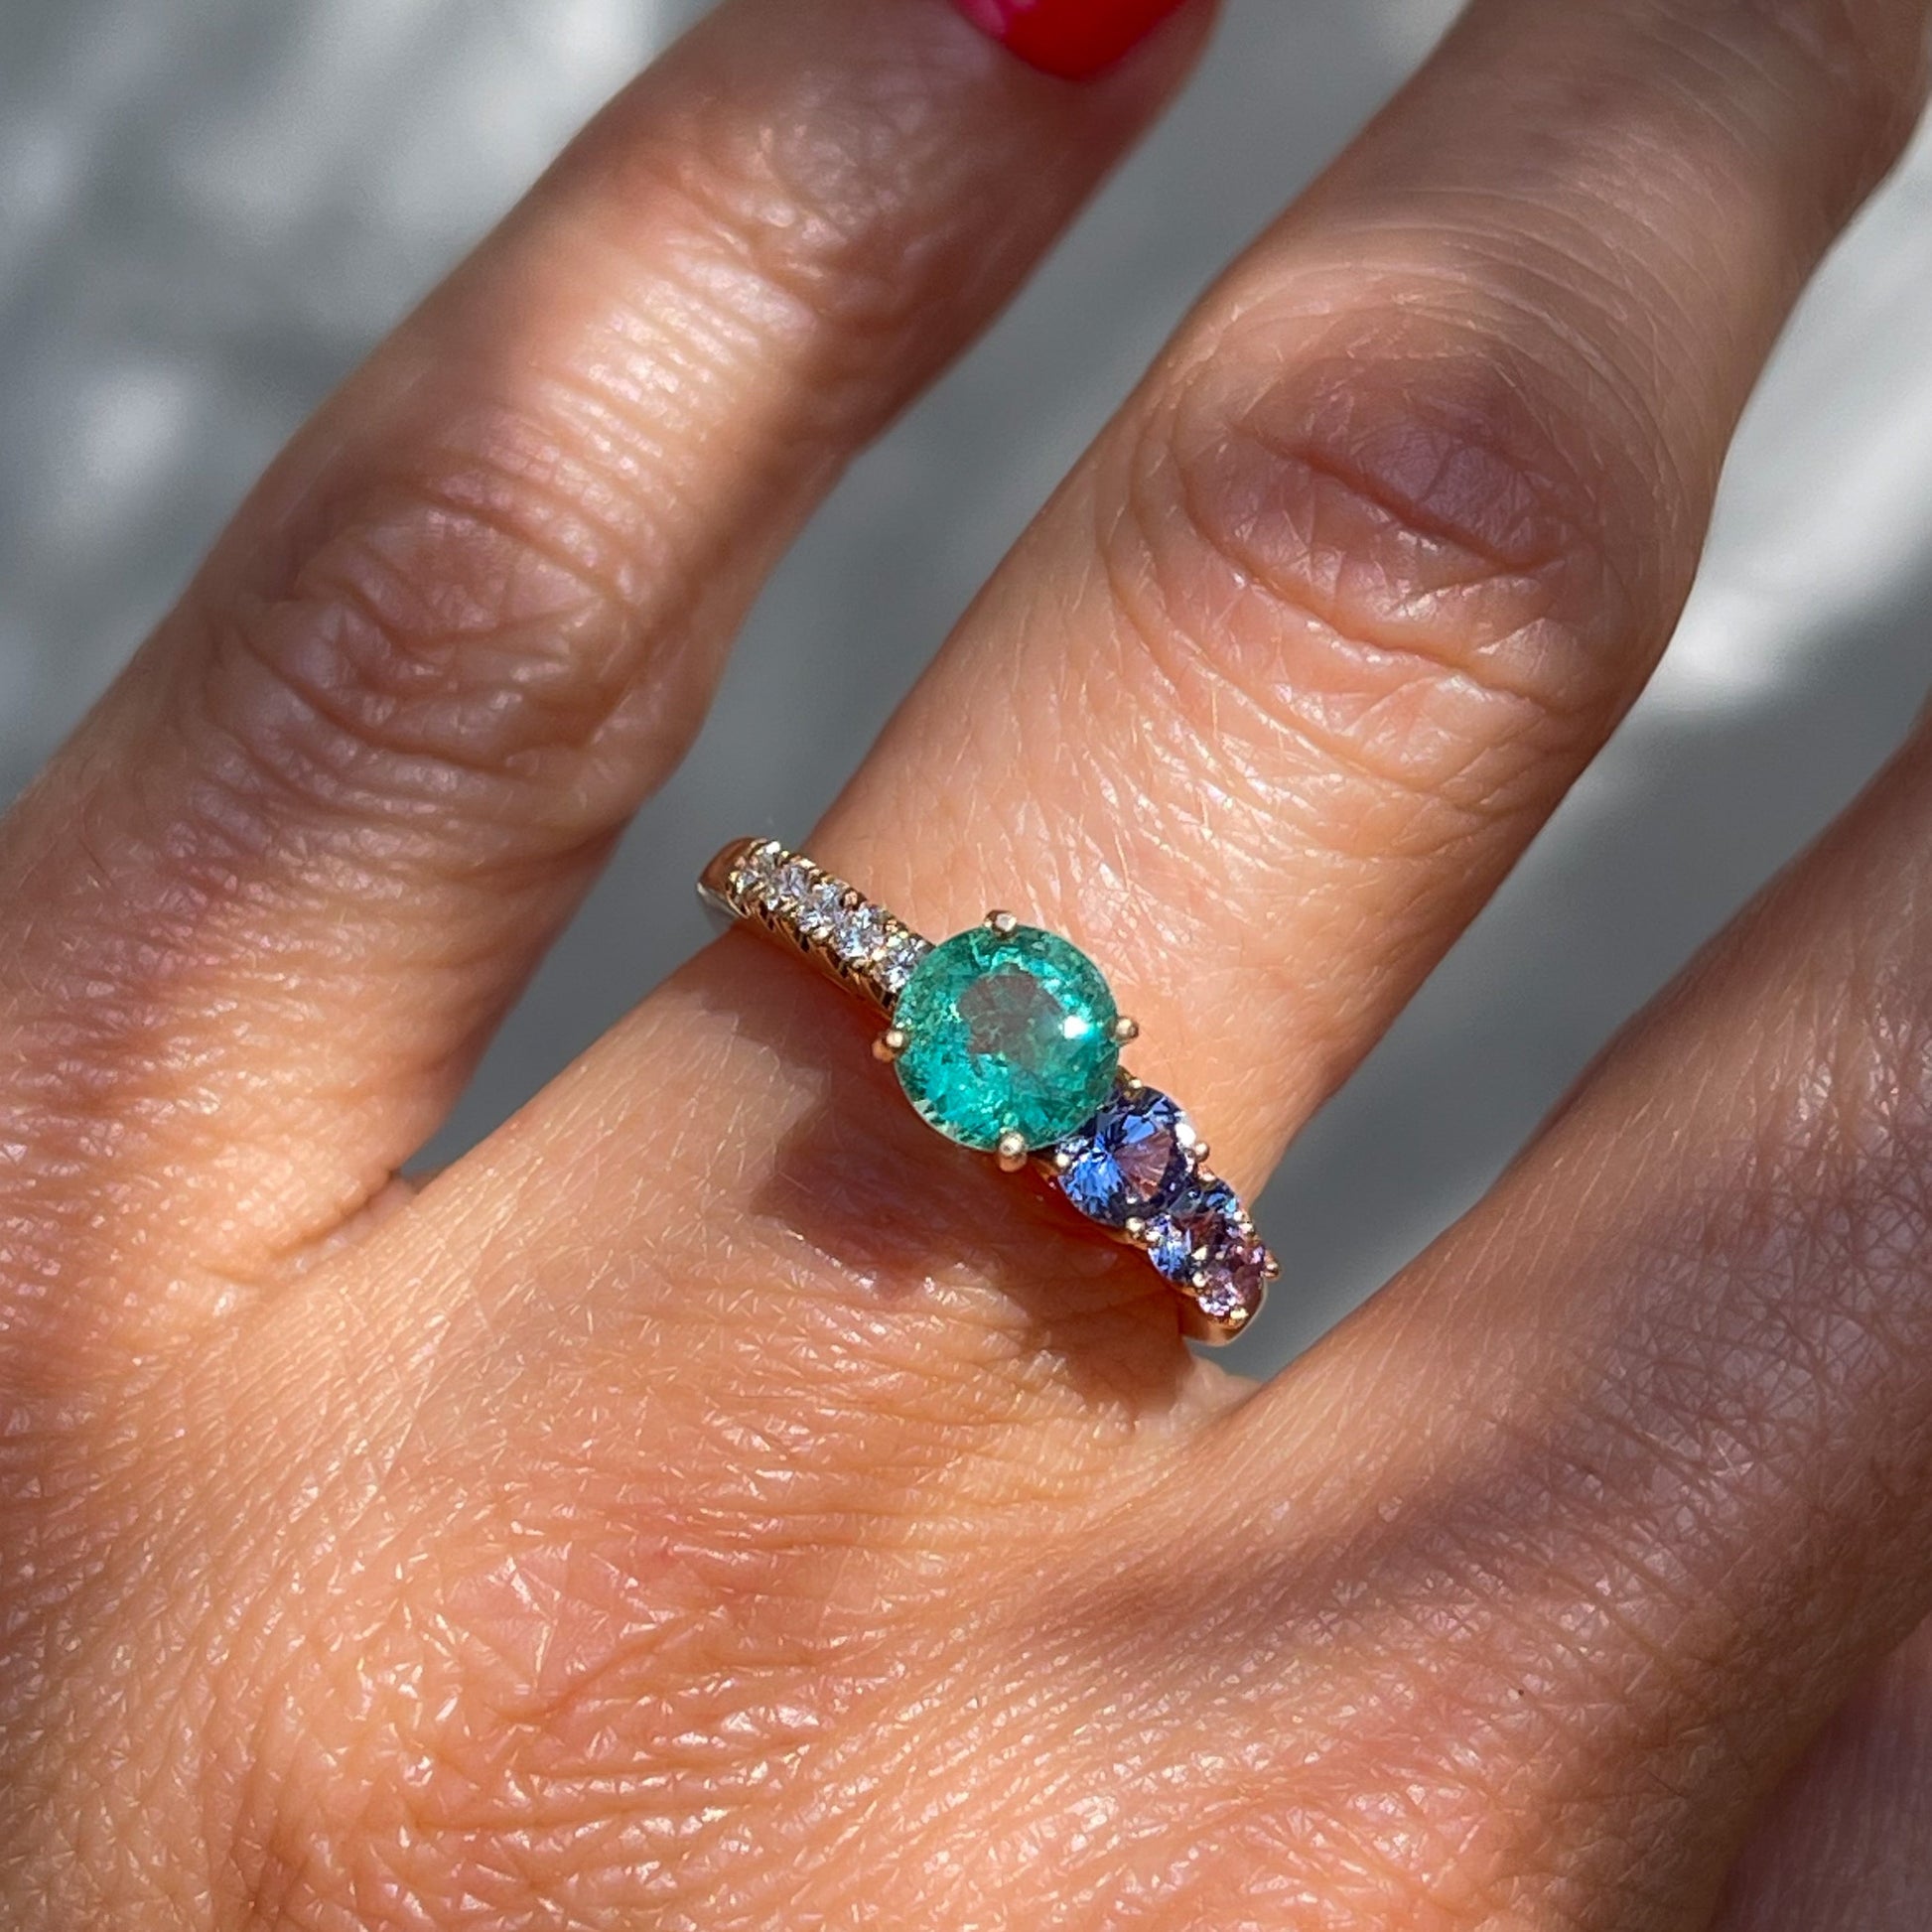 A Colombian Emerald Ring by NIXIN Jewelry modeled on a hand. Made in rose gold with purple sapphires and pave diamond. 